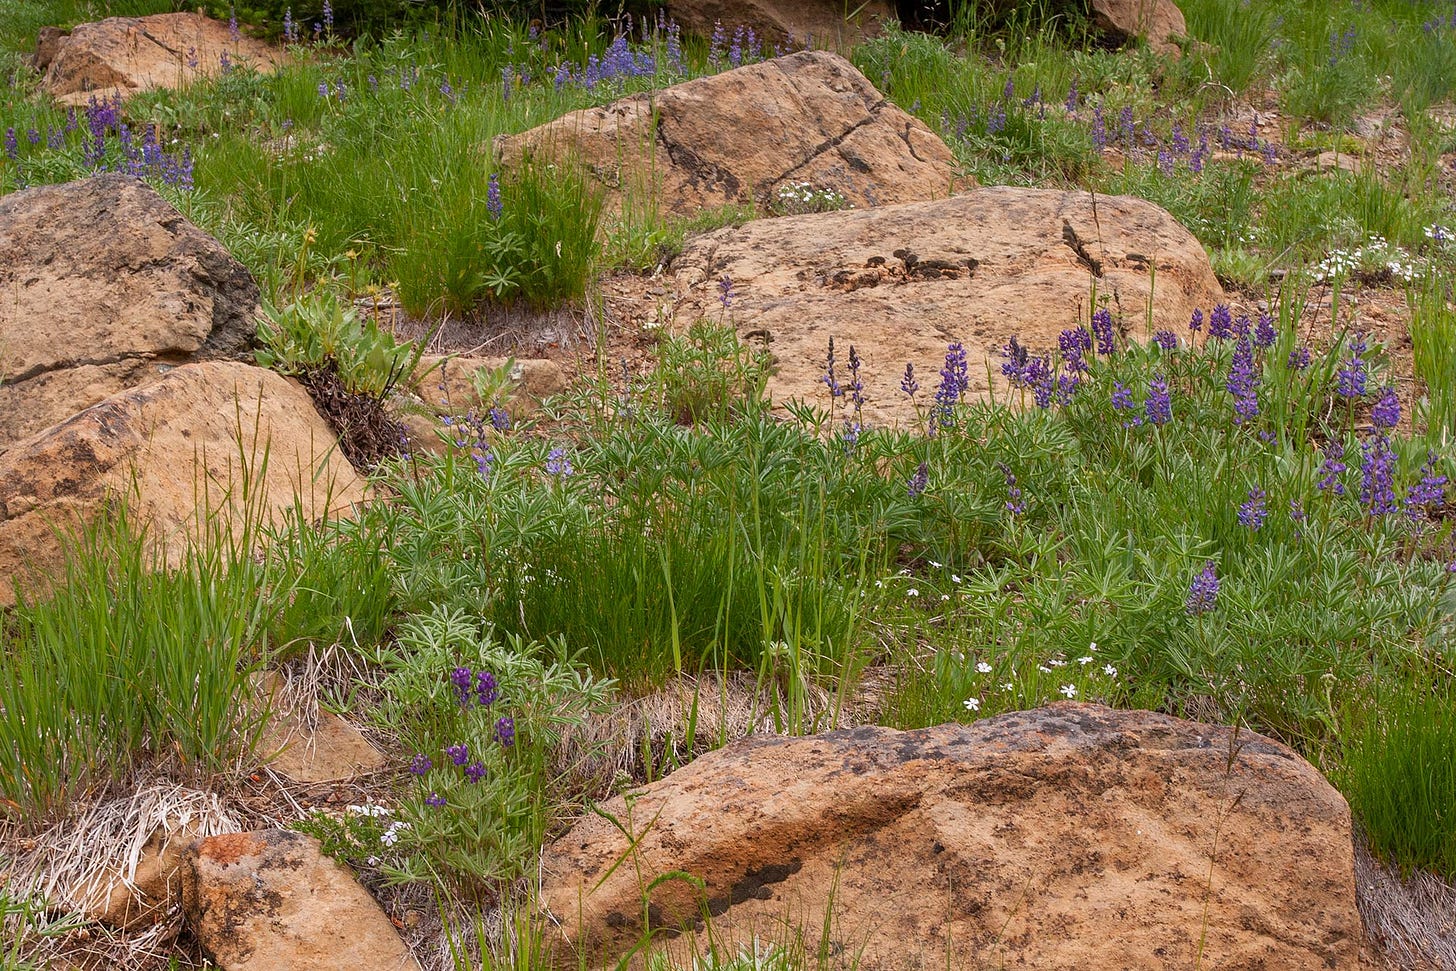 purple native lupine and white phlox between orange boulders in a field